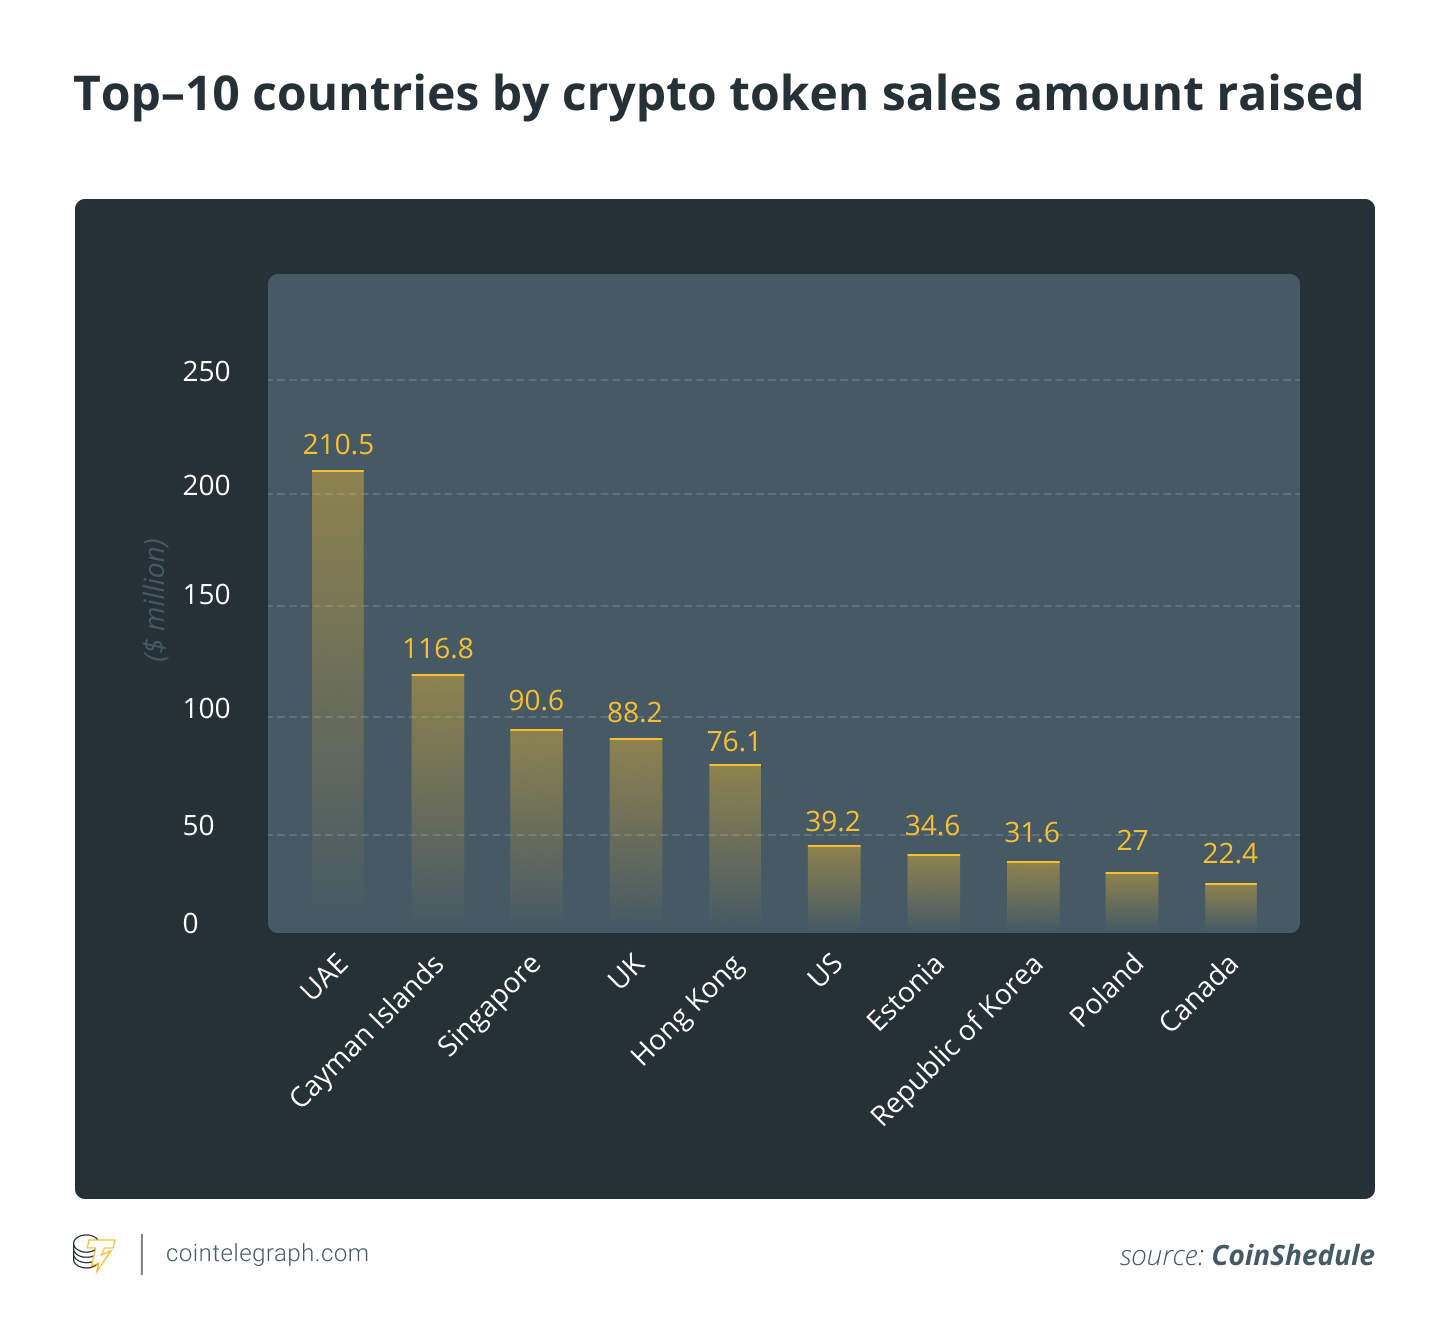 Top-10 countries by crypto token sales amount raised